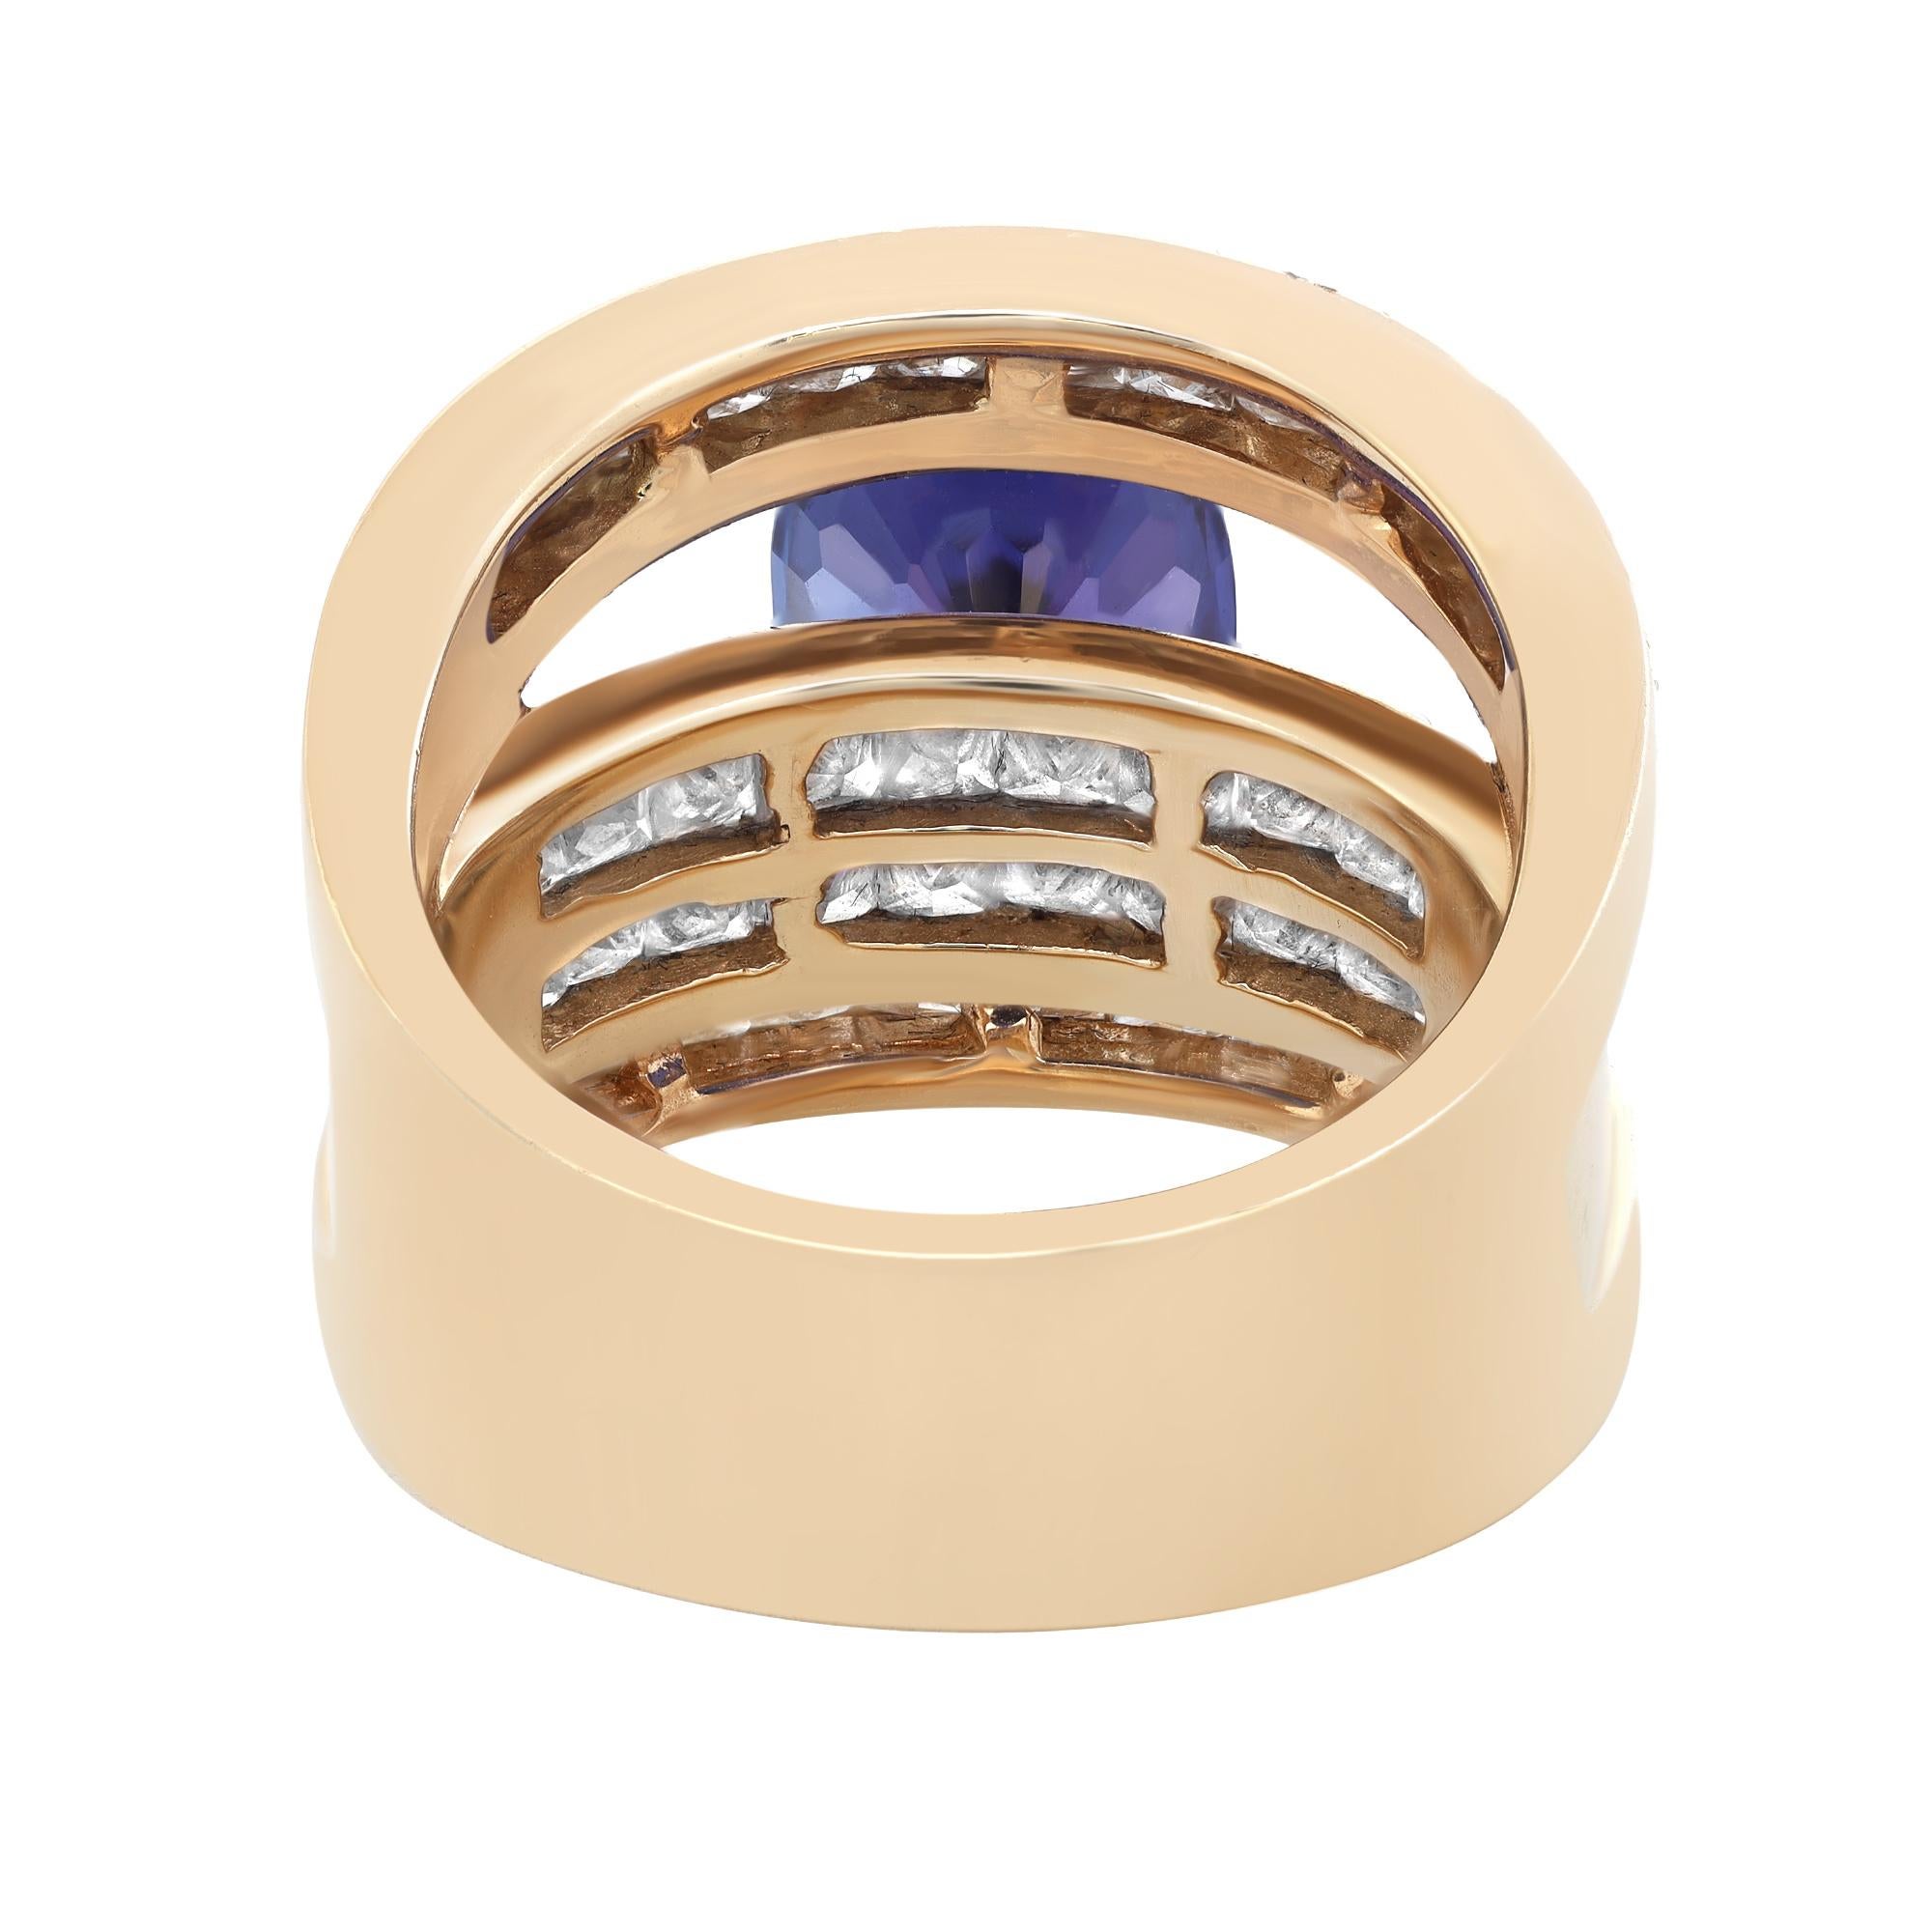 This stunning cocktail ring comes with a flashy statement look. A must have in your jewelry collection. The ring is crafted in 14k yellow gold. Features oval cut bluish violet Tanzanite weighing 3.88 carats flanked with 48 bright white princess cut